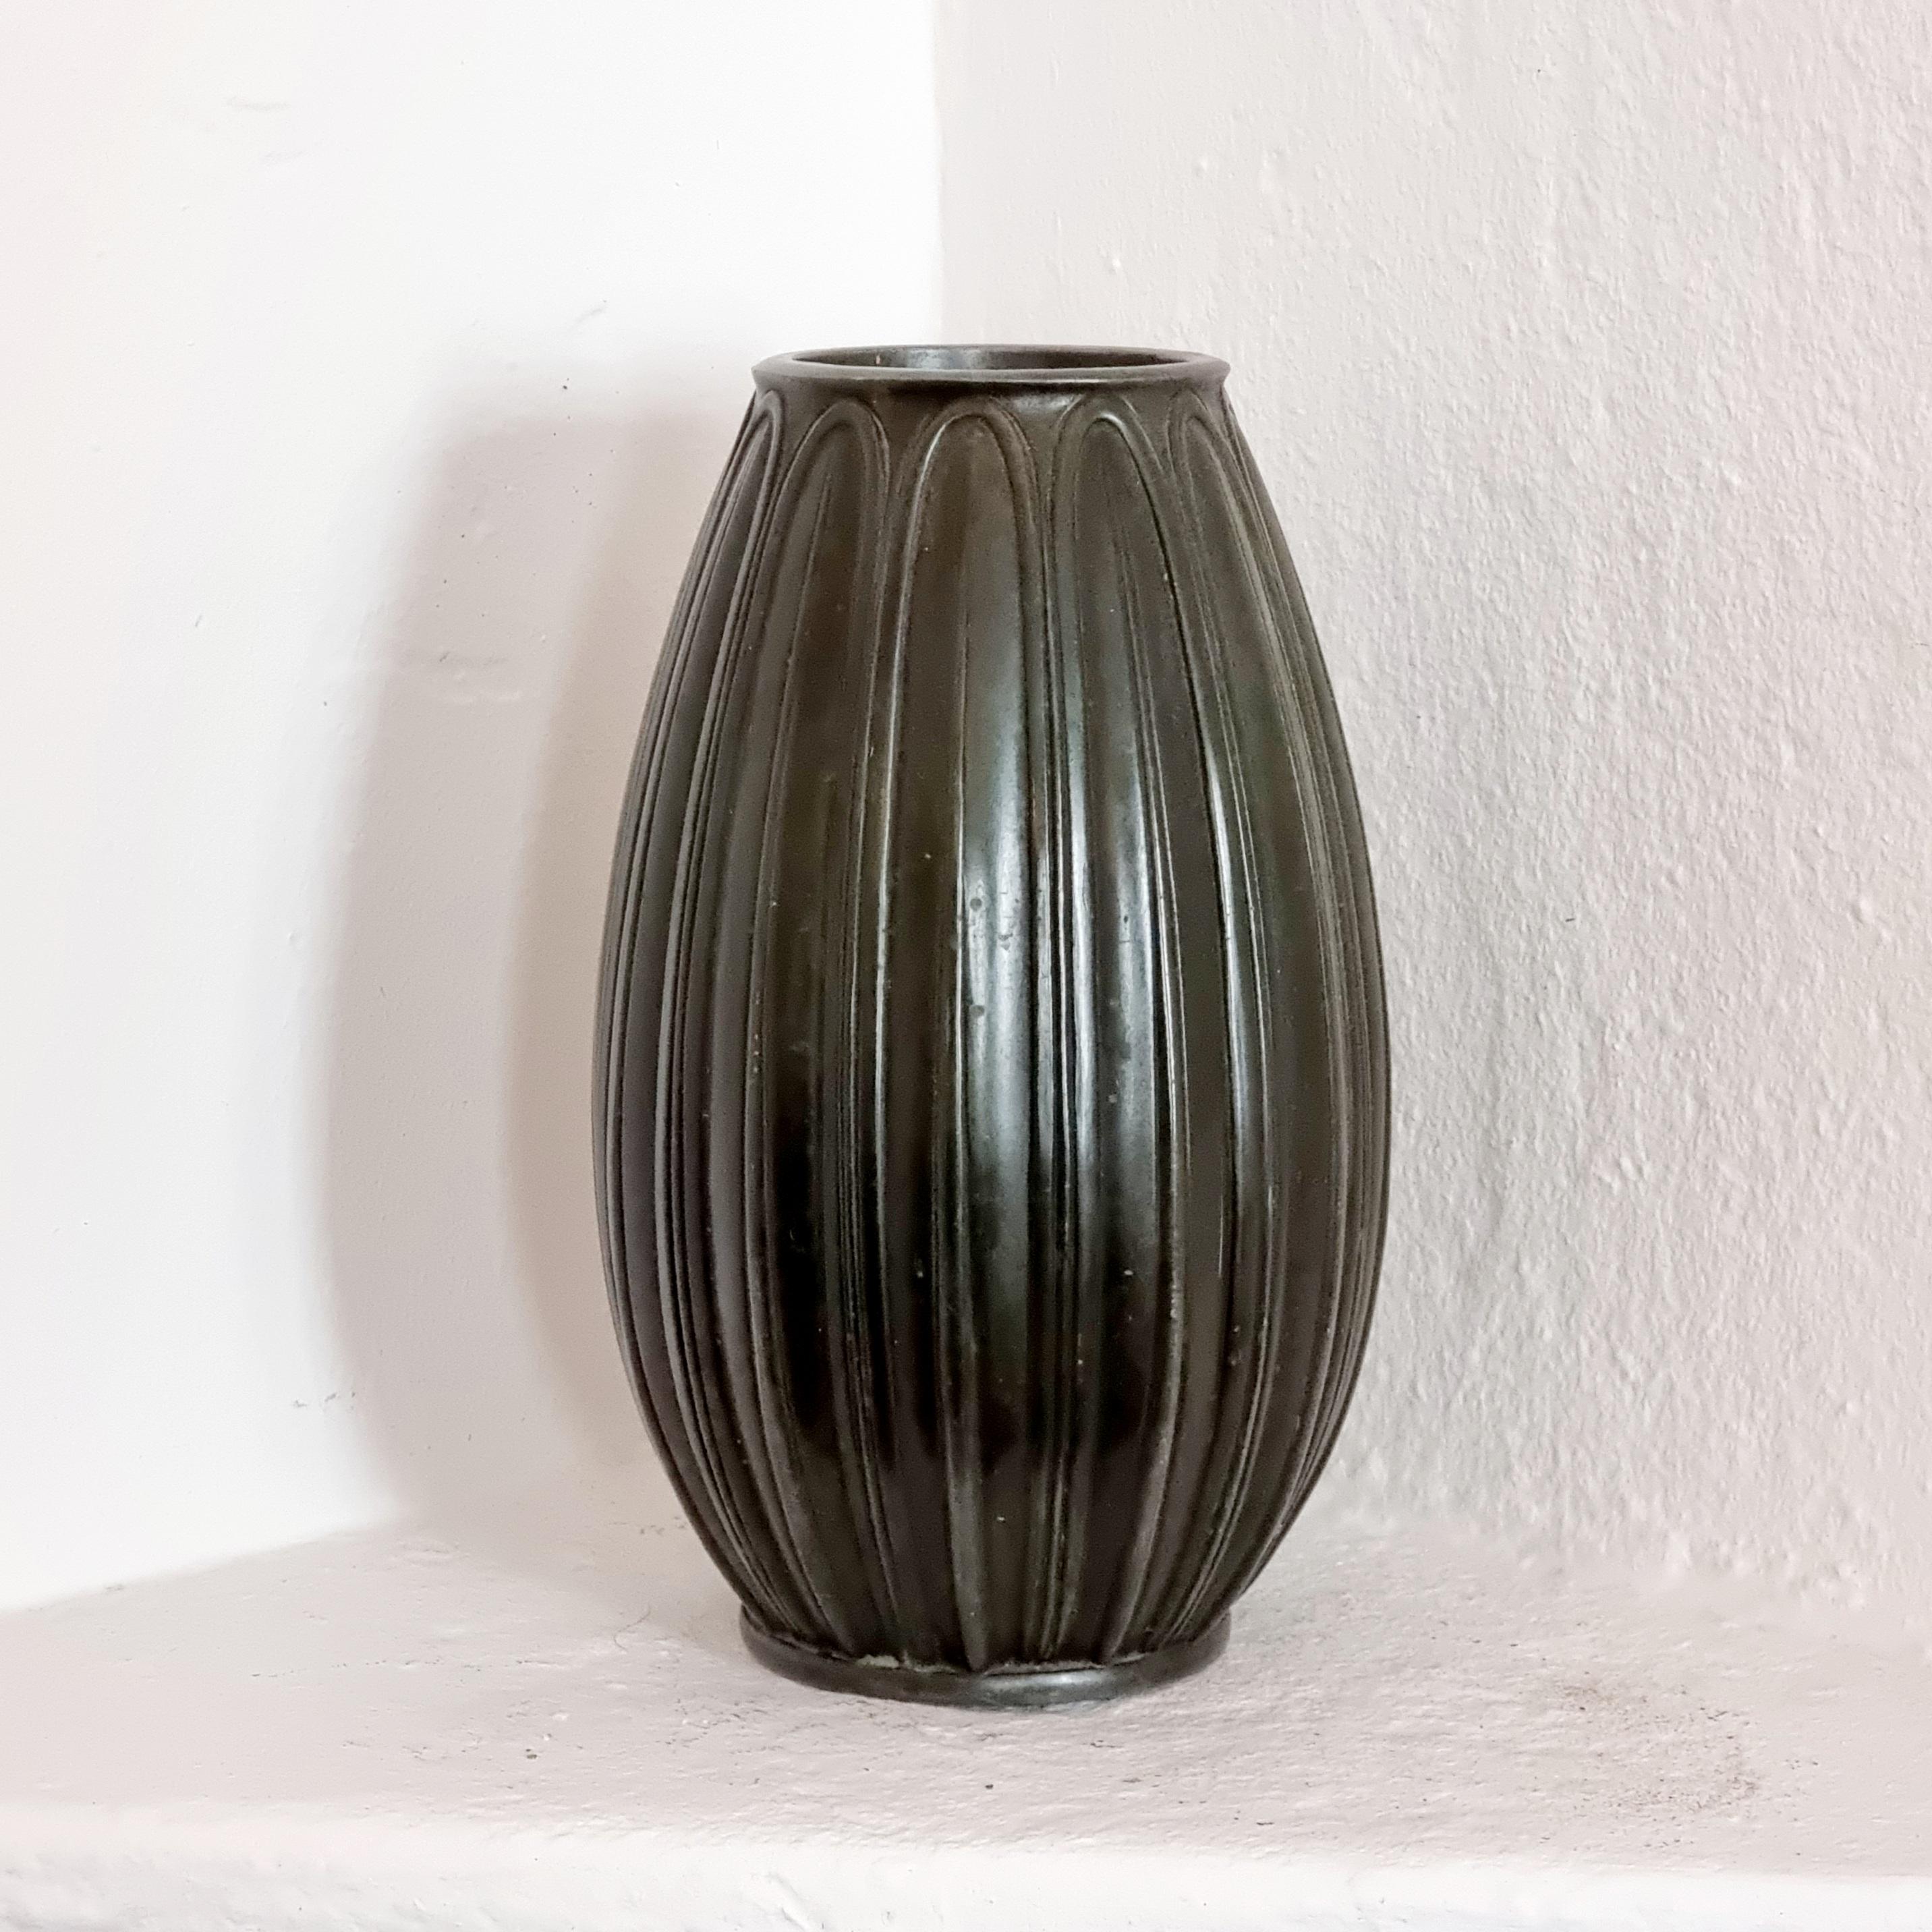 A beautiful, decorative Art Deci vase in bronze patinated zinc, manufactured in Denmark by Just Andersen.

Stylized pattern and nice patina. Normal signs of age and wear. Bottom with makers hallmark.



